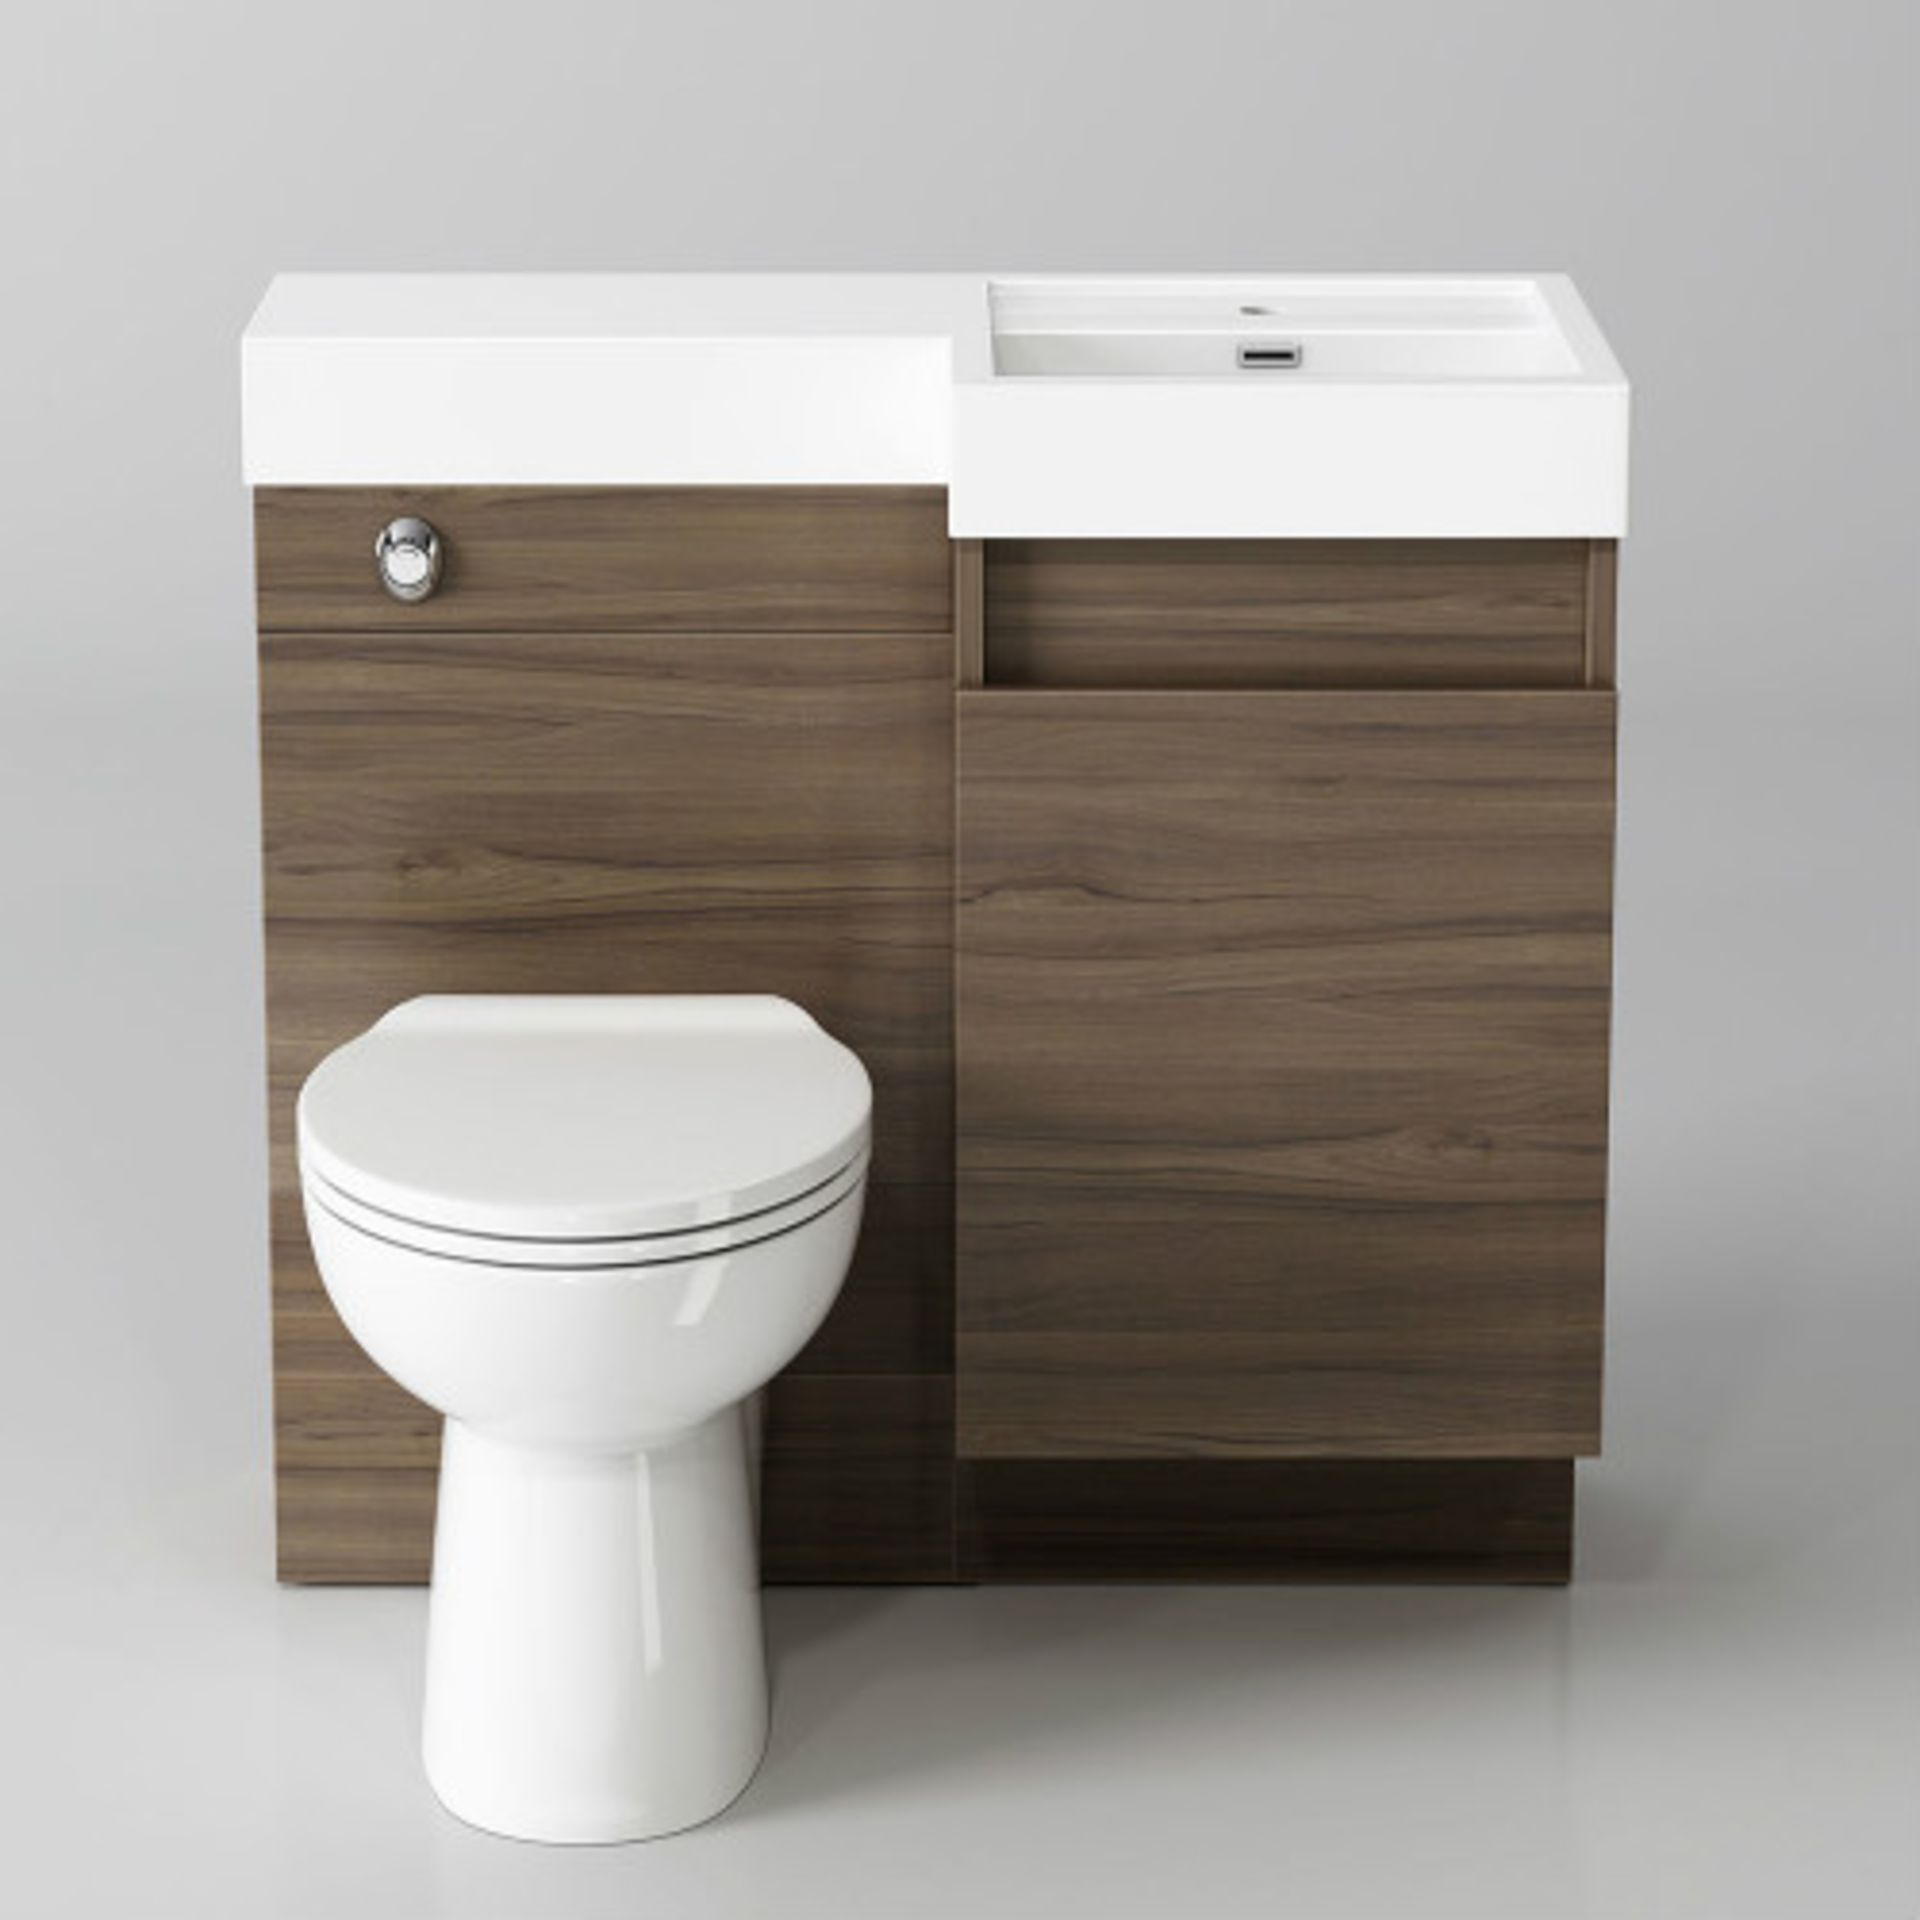 Brand New 906mm Olympia Walnut Effect Drawer Vanity Unit Right with Quartz Pan FULL SET. RRP £999.99 - Image 2 of 3